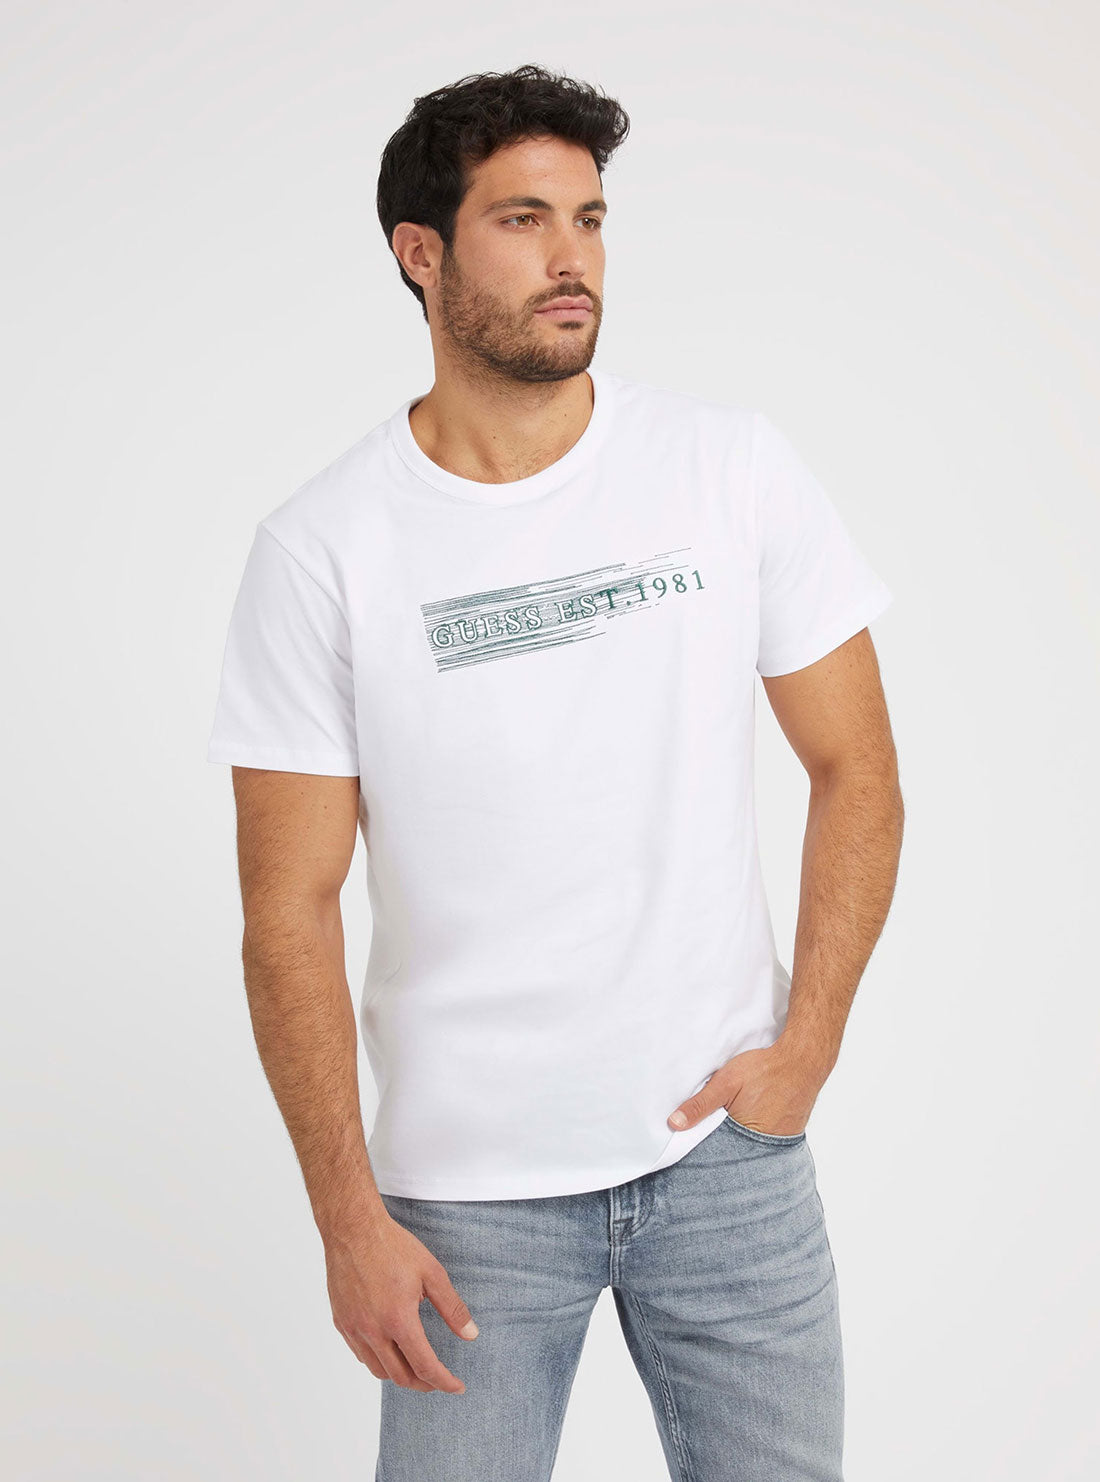 White Logo Embroidered T-Shirt | GUESS Men's | Front view